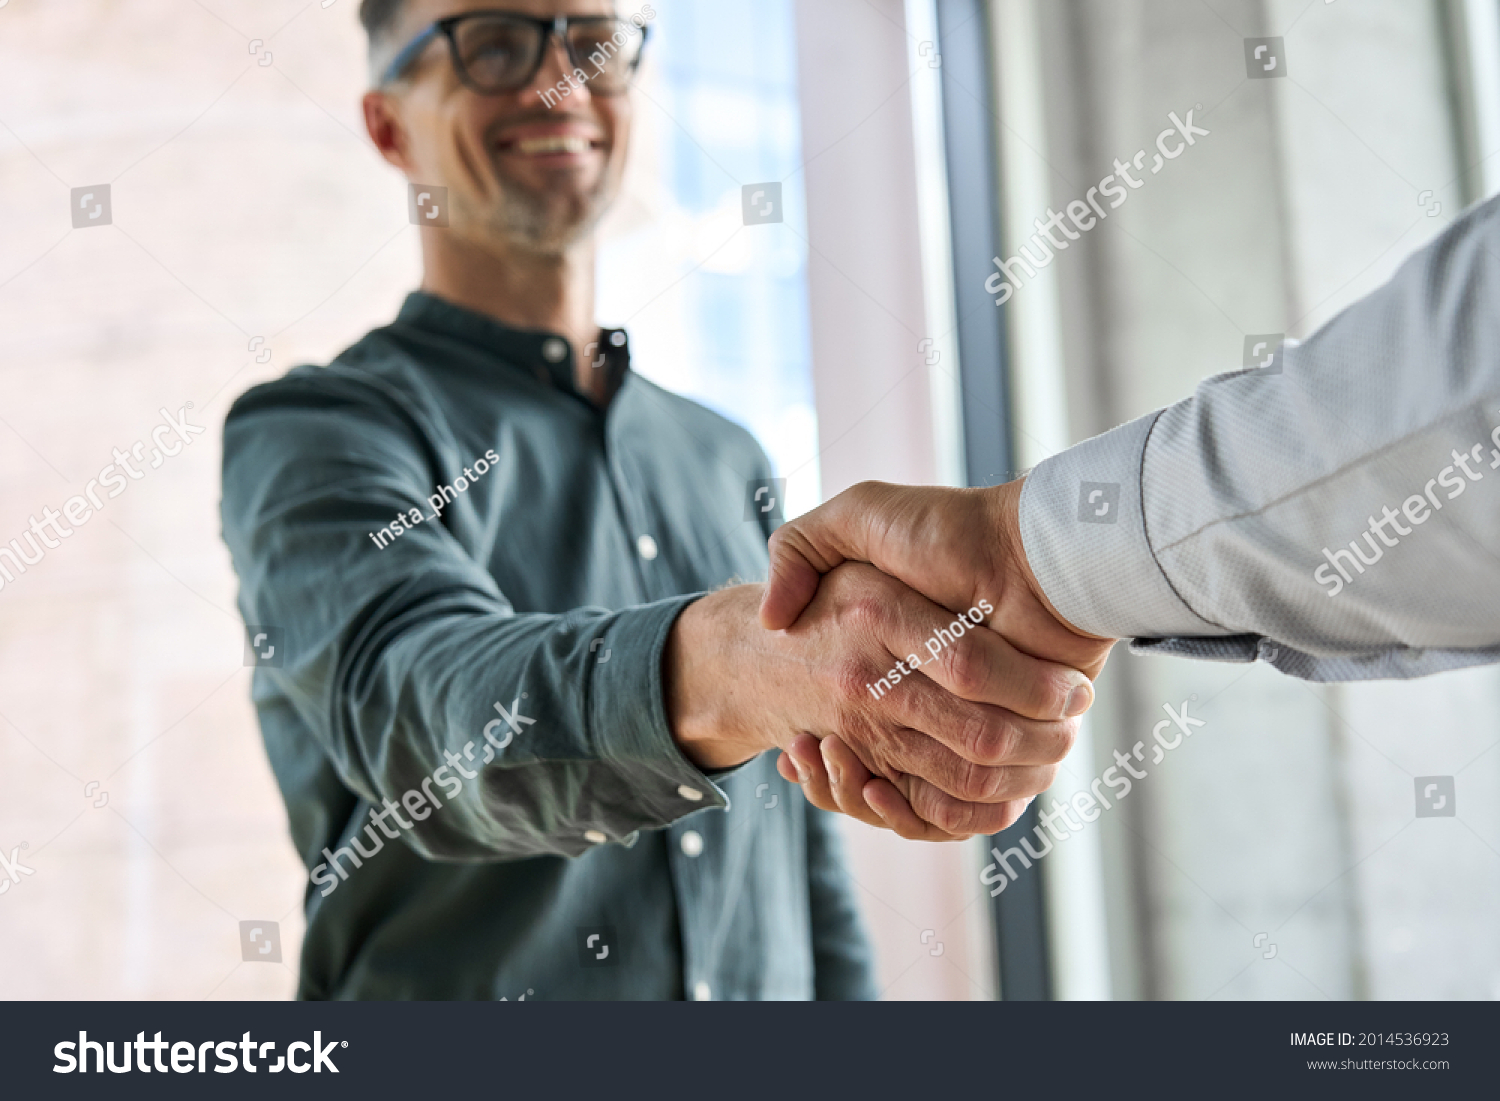 Two happy diverse professional business men executive leaders shaking hands at office meeting. Smiling businessman standing greeting partner with handshake. Leadership, trust, partnership concept. #2014536923